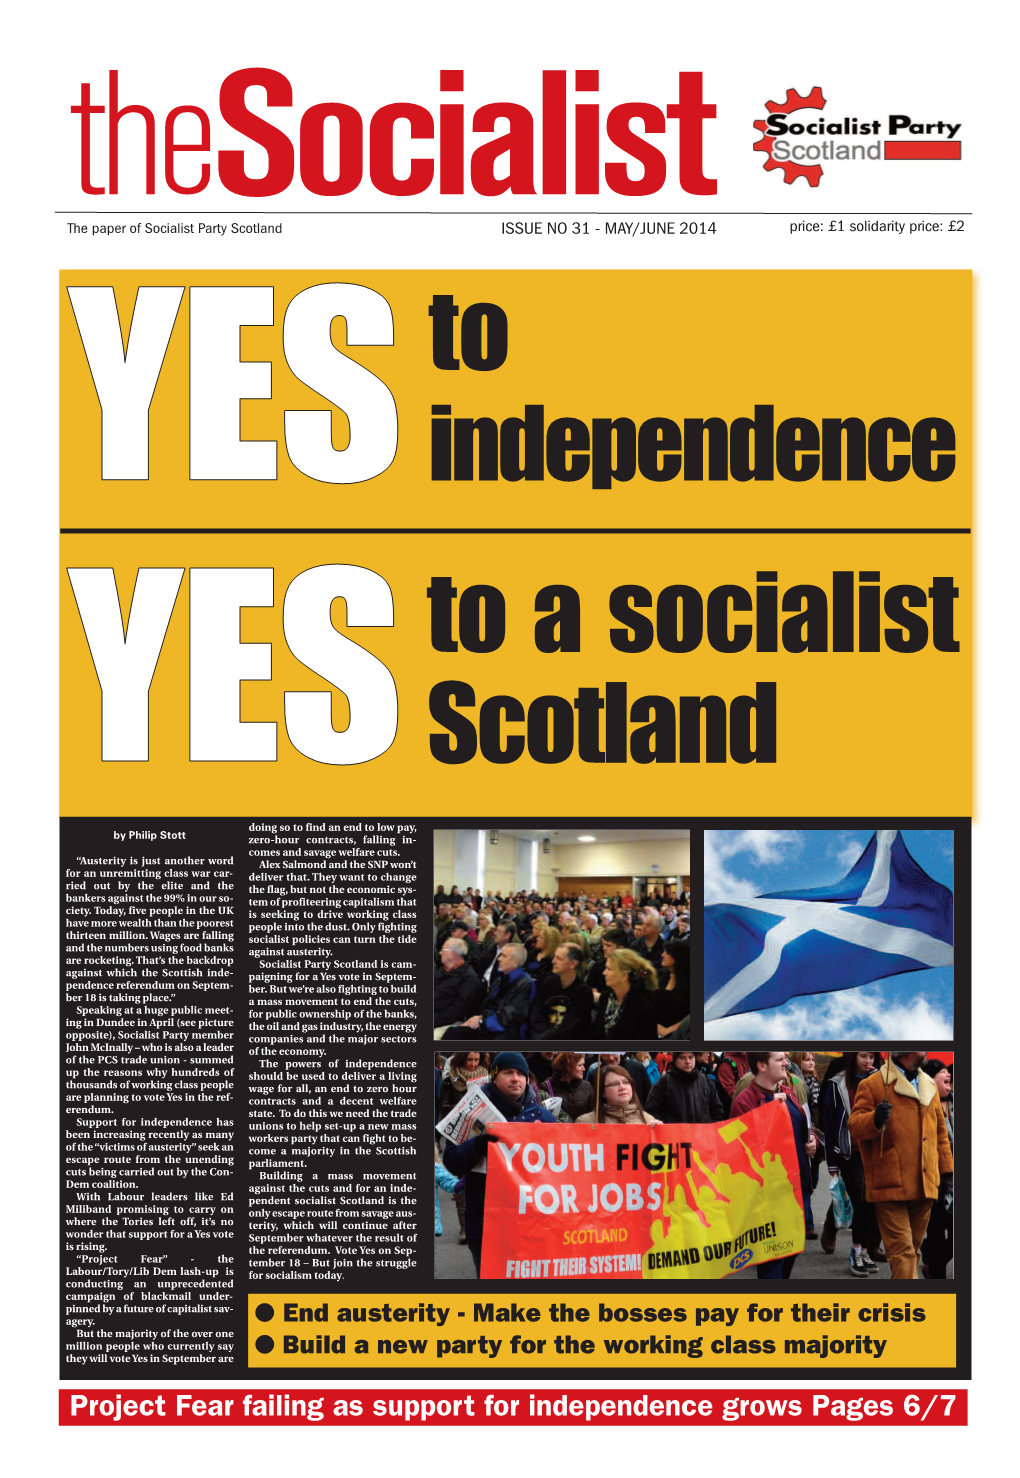 Project Fear Failing As Support for Independence Grows Pages 6/7 2 Editorial the Socialist - May/June 2014